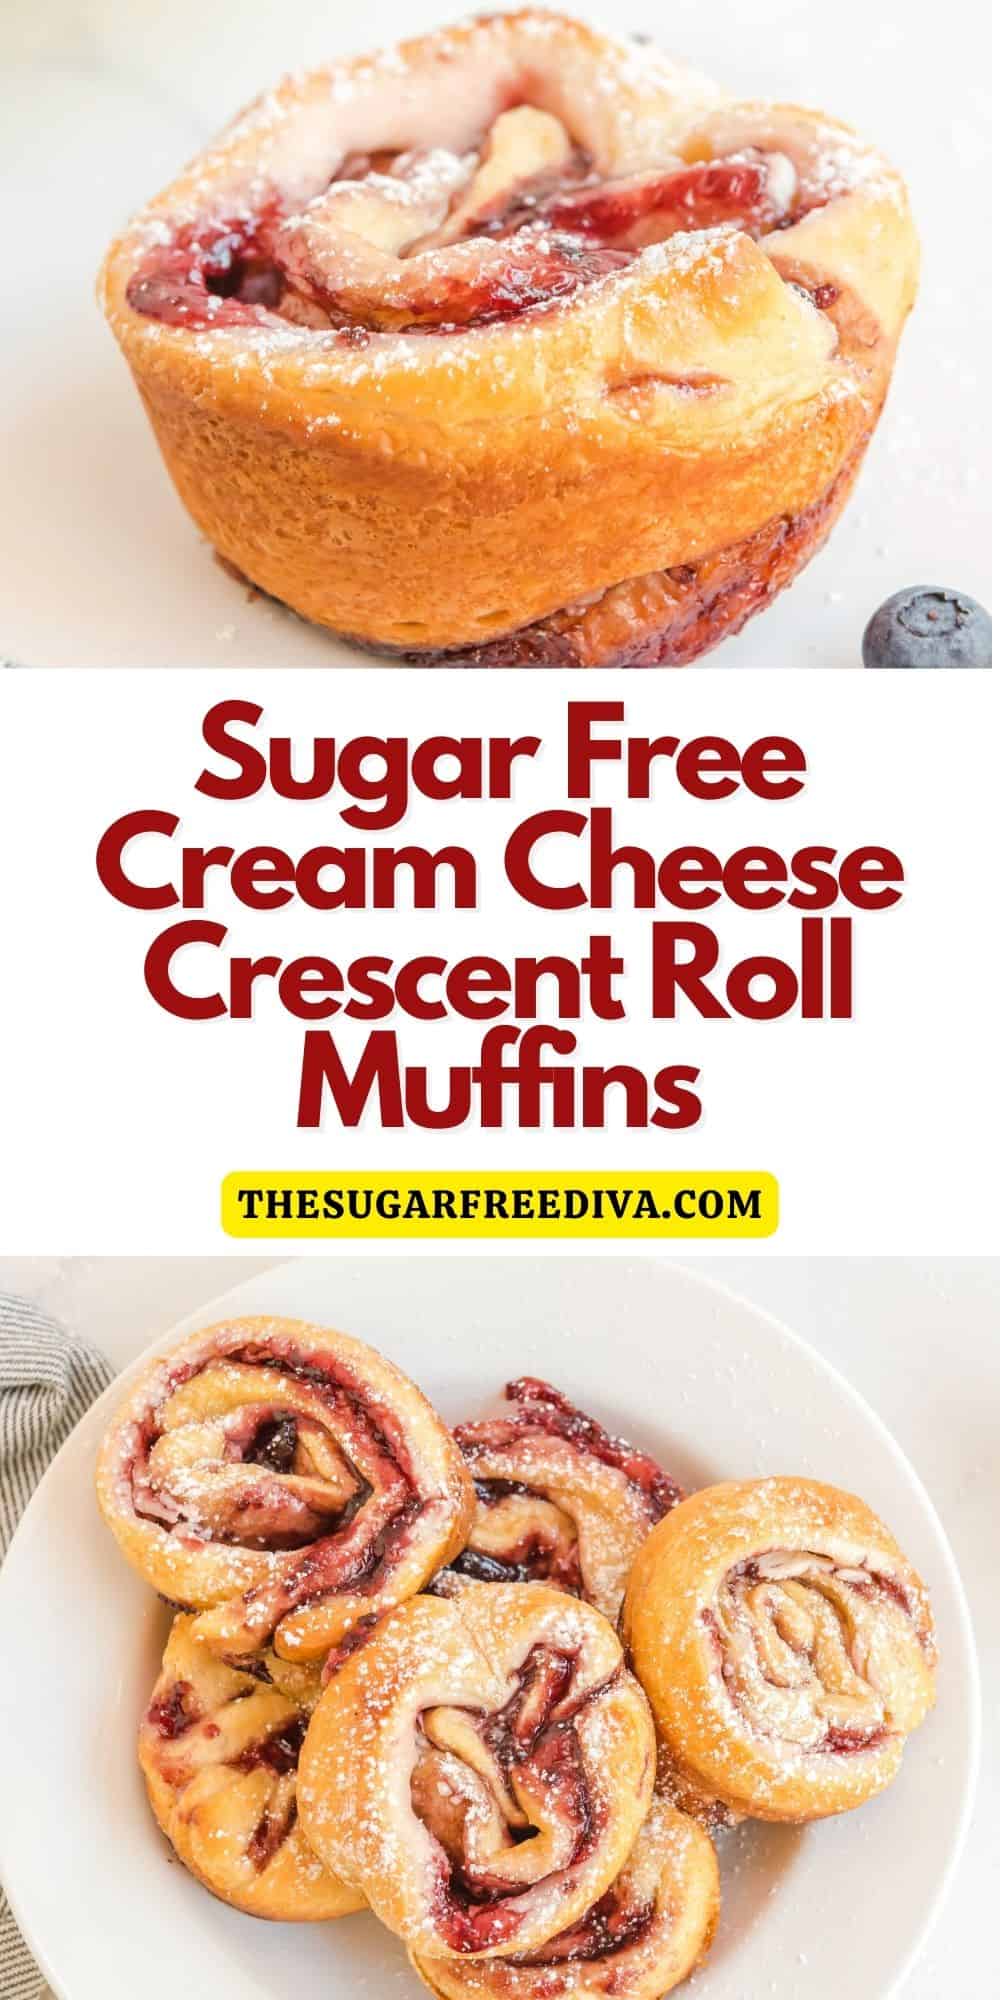 Sugar Free Cream Cheese Crescent Roll Muffins, a simple three ingredient breakfast or brunch recipe made with not added sugar.